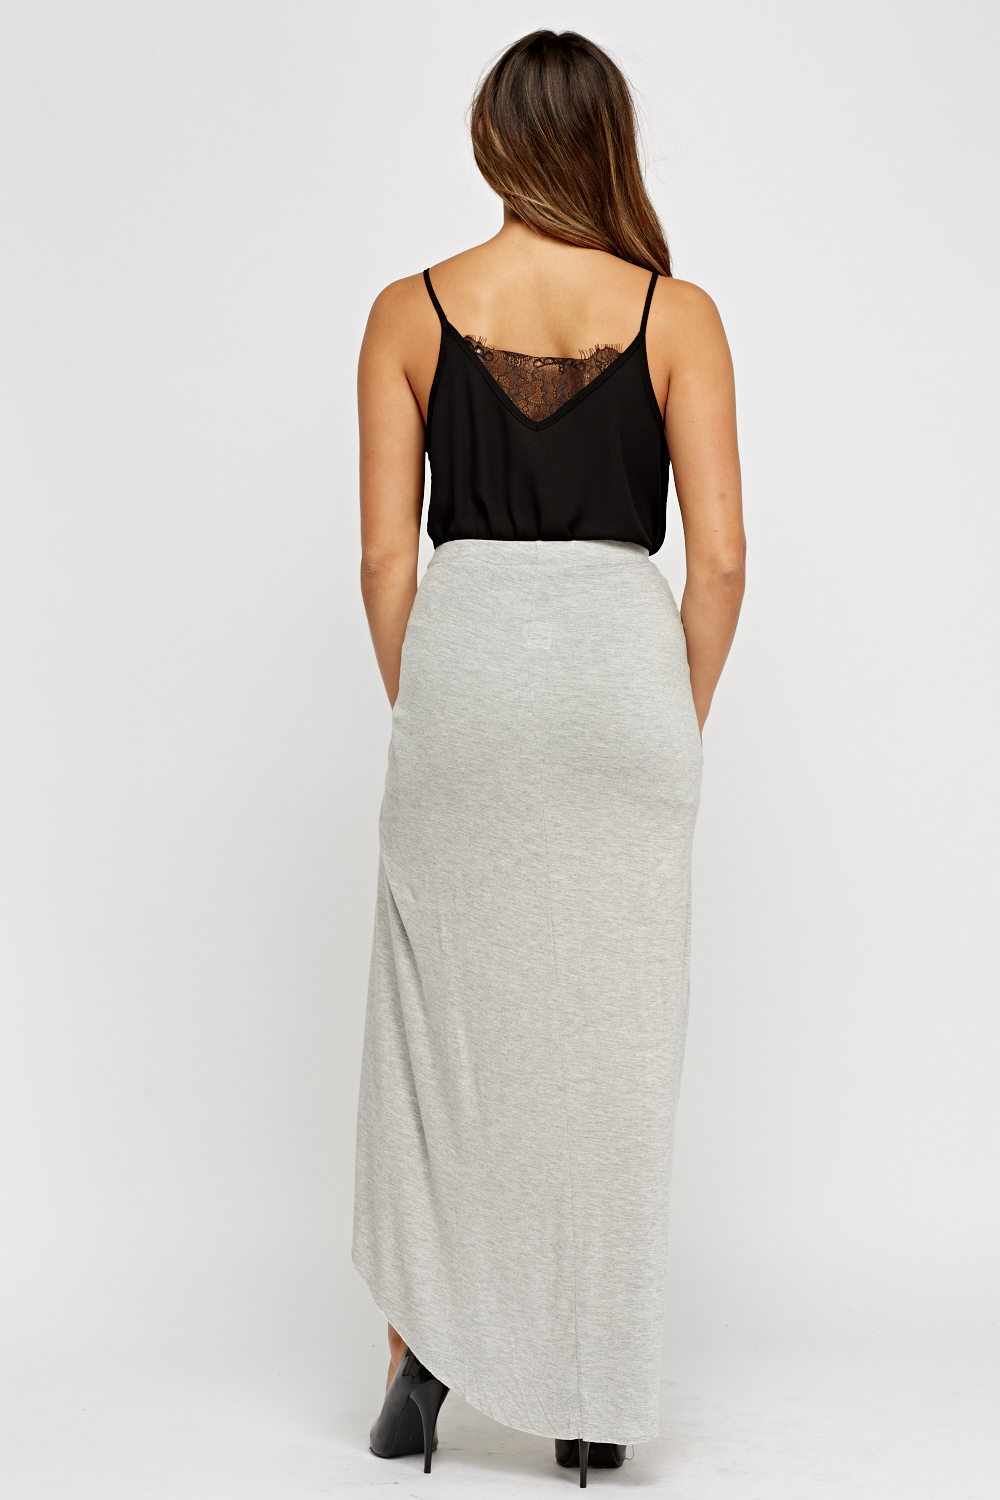 Ruched Grey Bodycon Maxi Skirt - Just $6